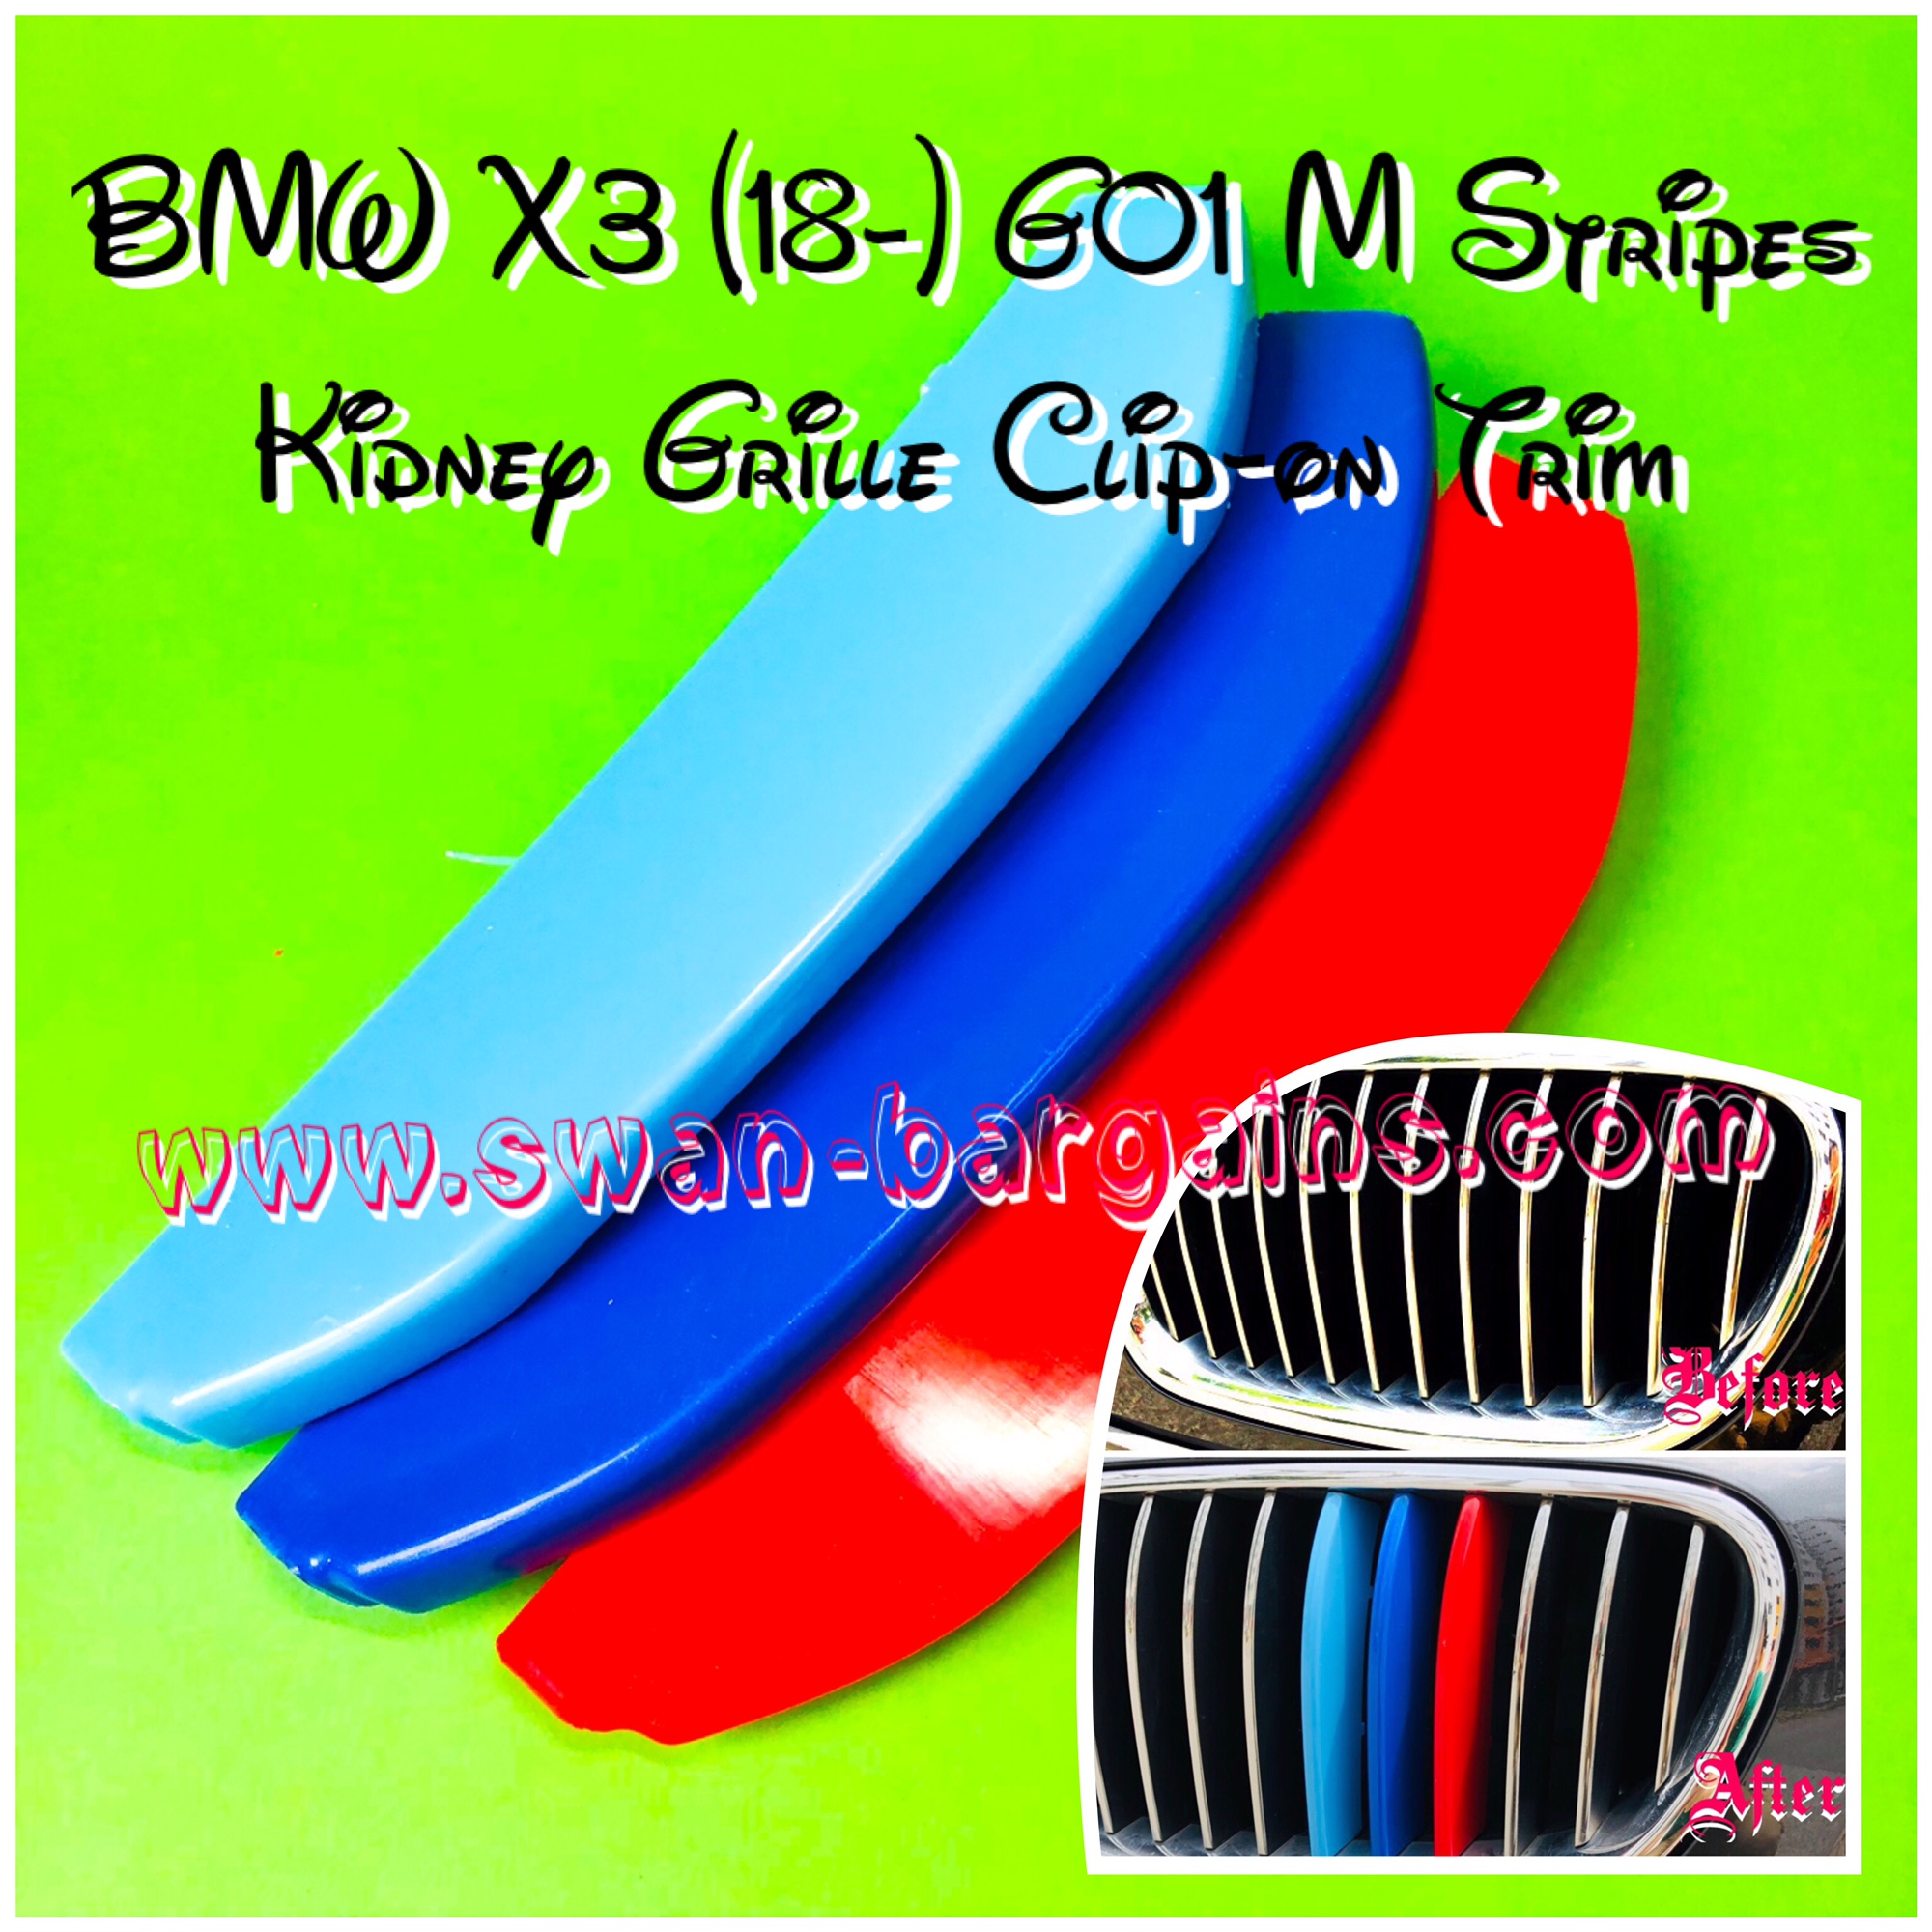 BMW X3 Kidney Grille Tri-Color Snap-in Trim Singapore